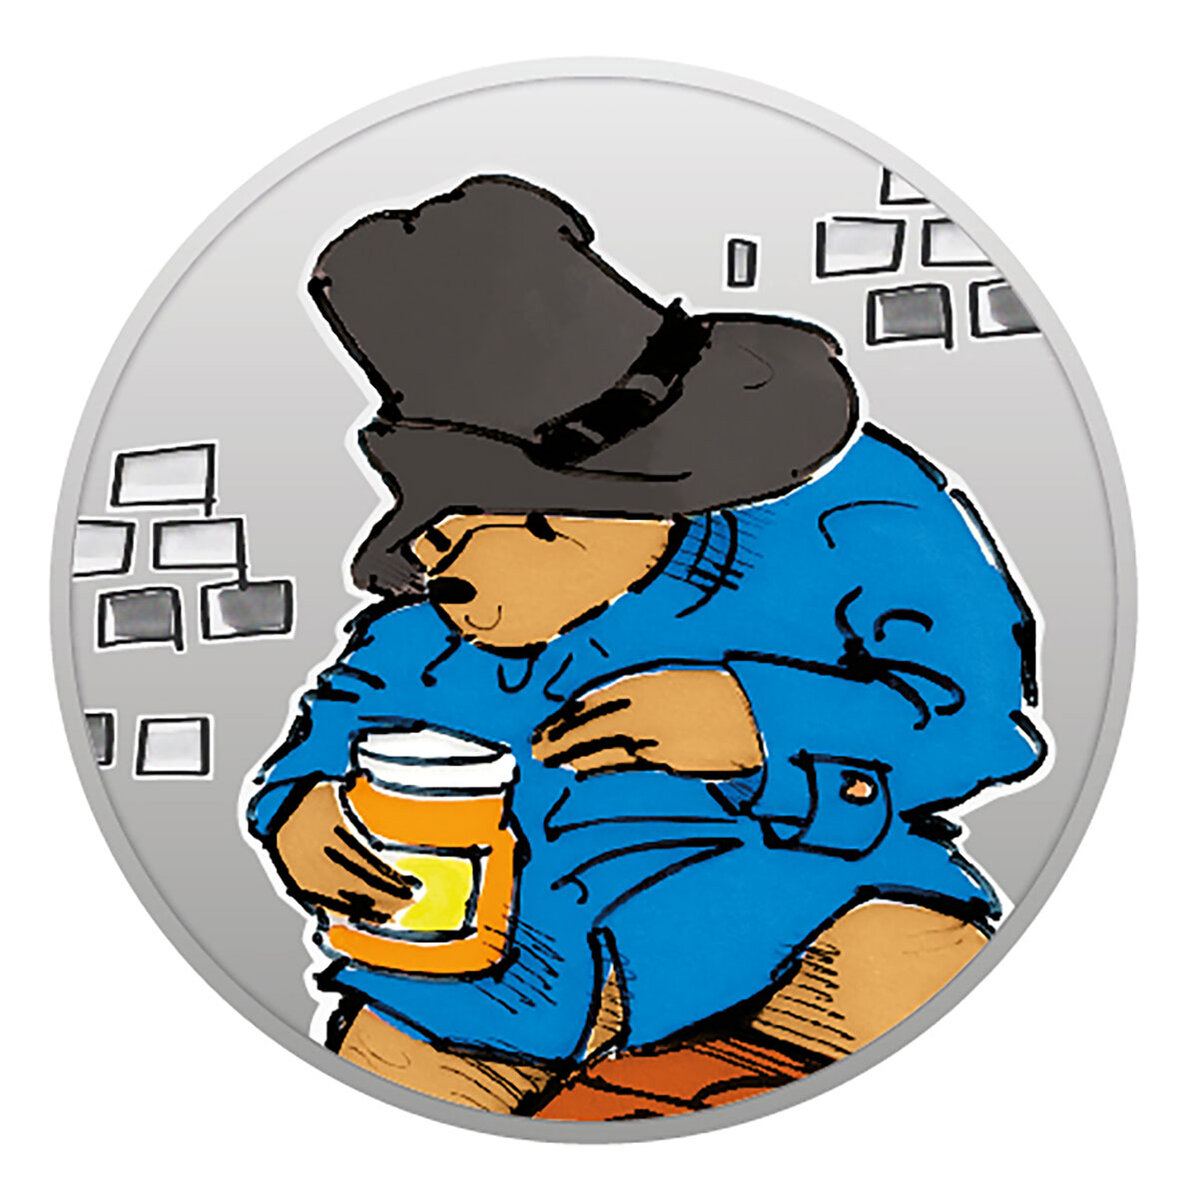 Official Paddington Medal Cover by Royal Mail